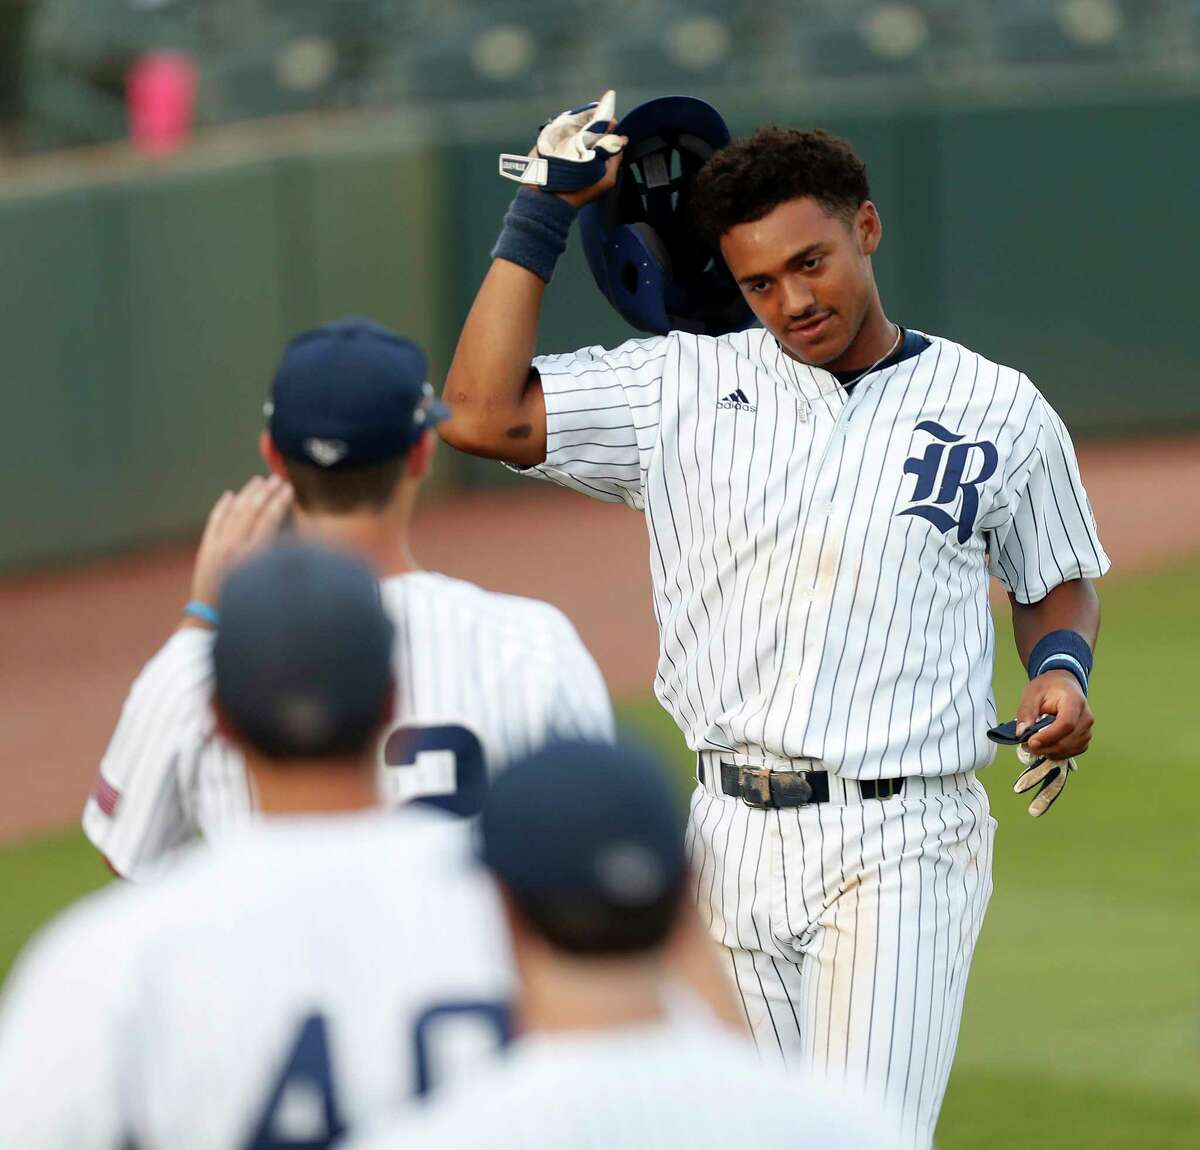 ﻿Dane Myers, right, becomes one of Rice's six third-inning runs Tuesday en route to a 10-1 victory over Texas State. The Owls have won 12 of their last 15 games.﻿